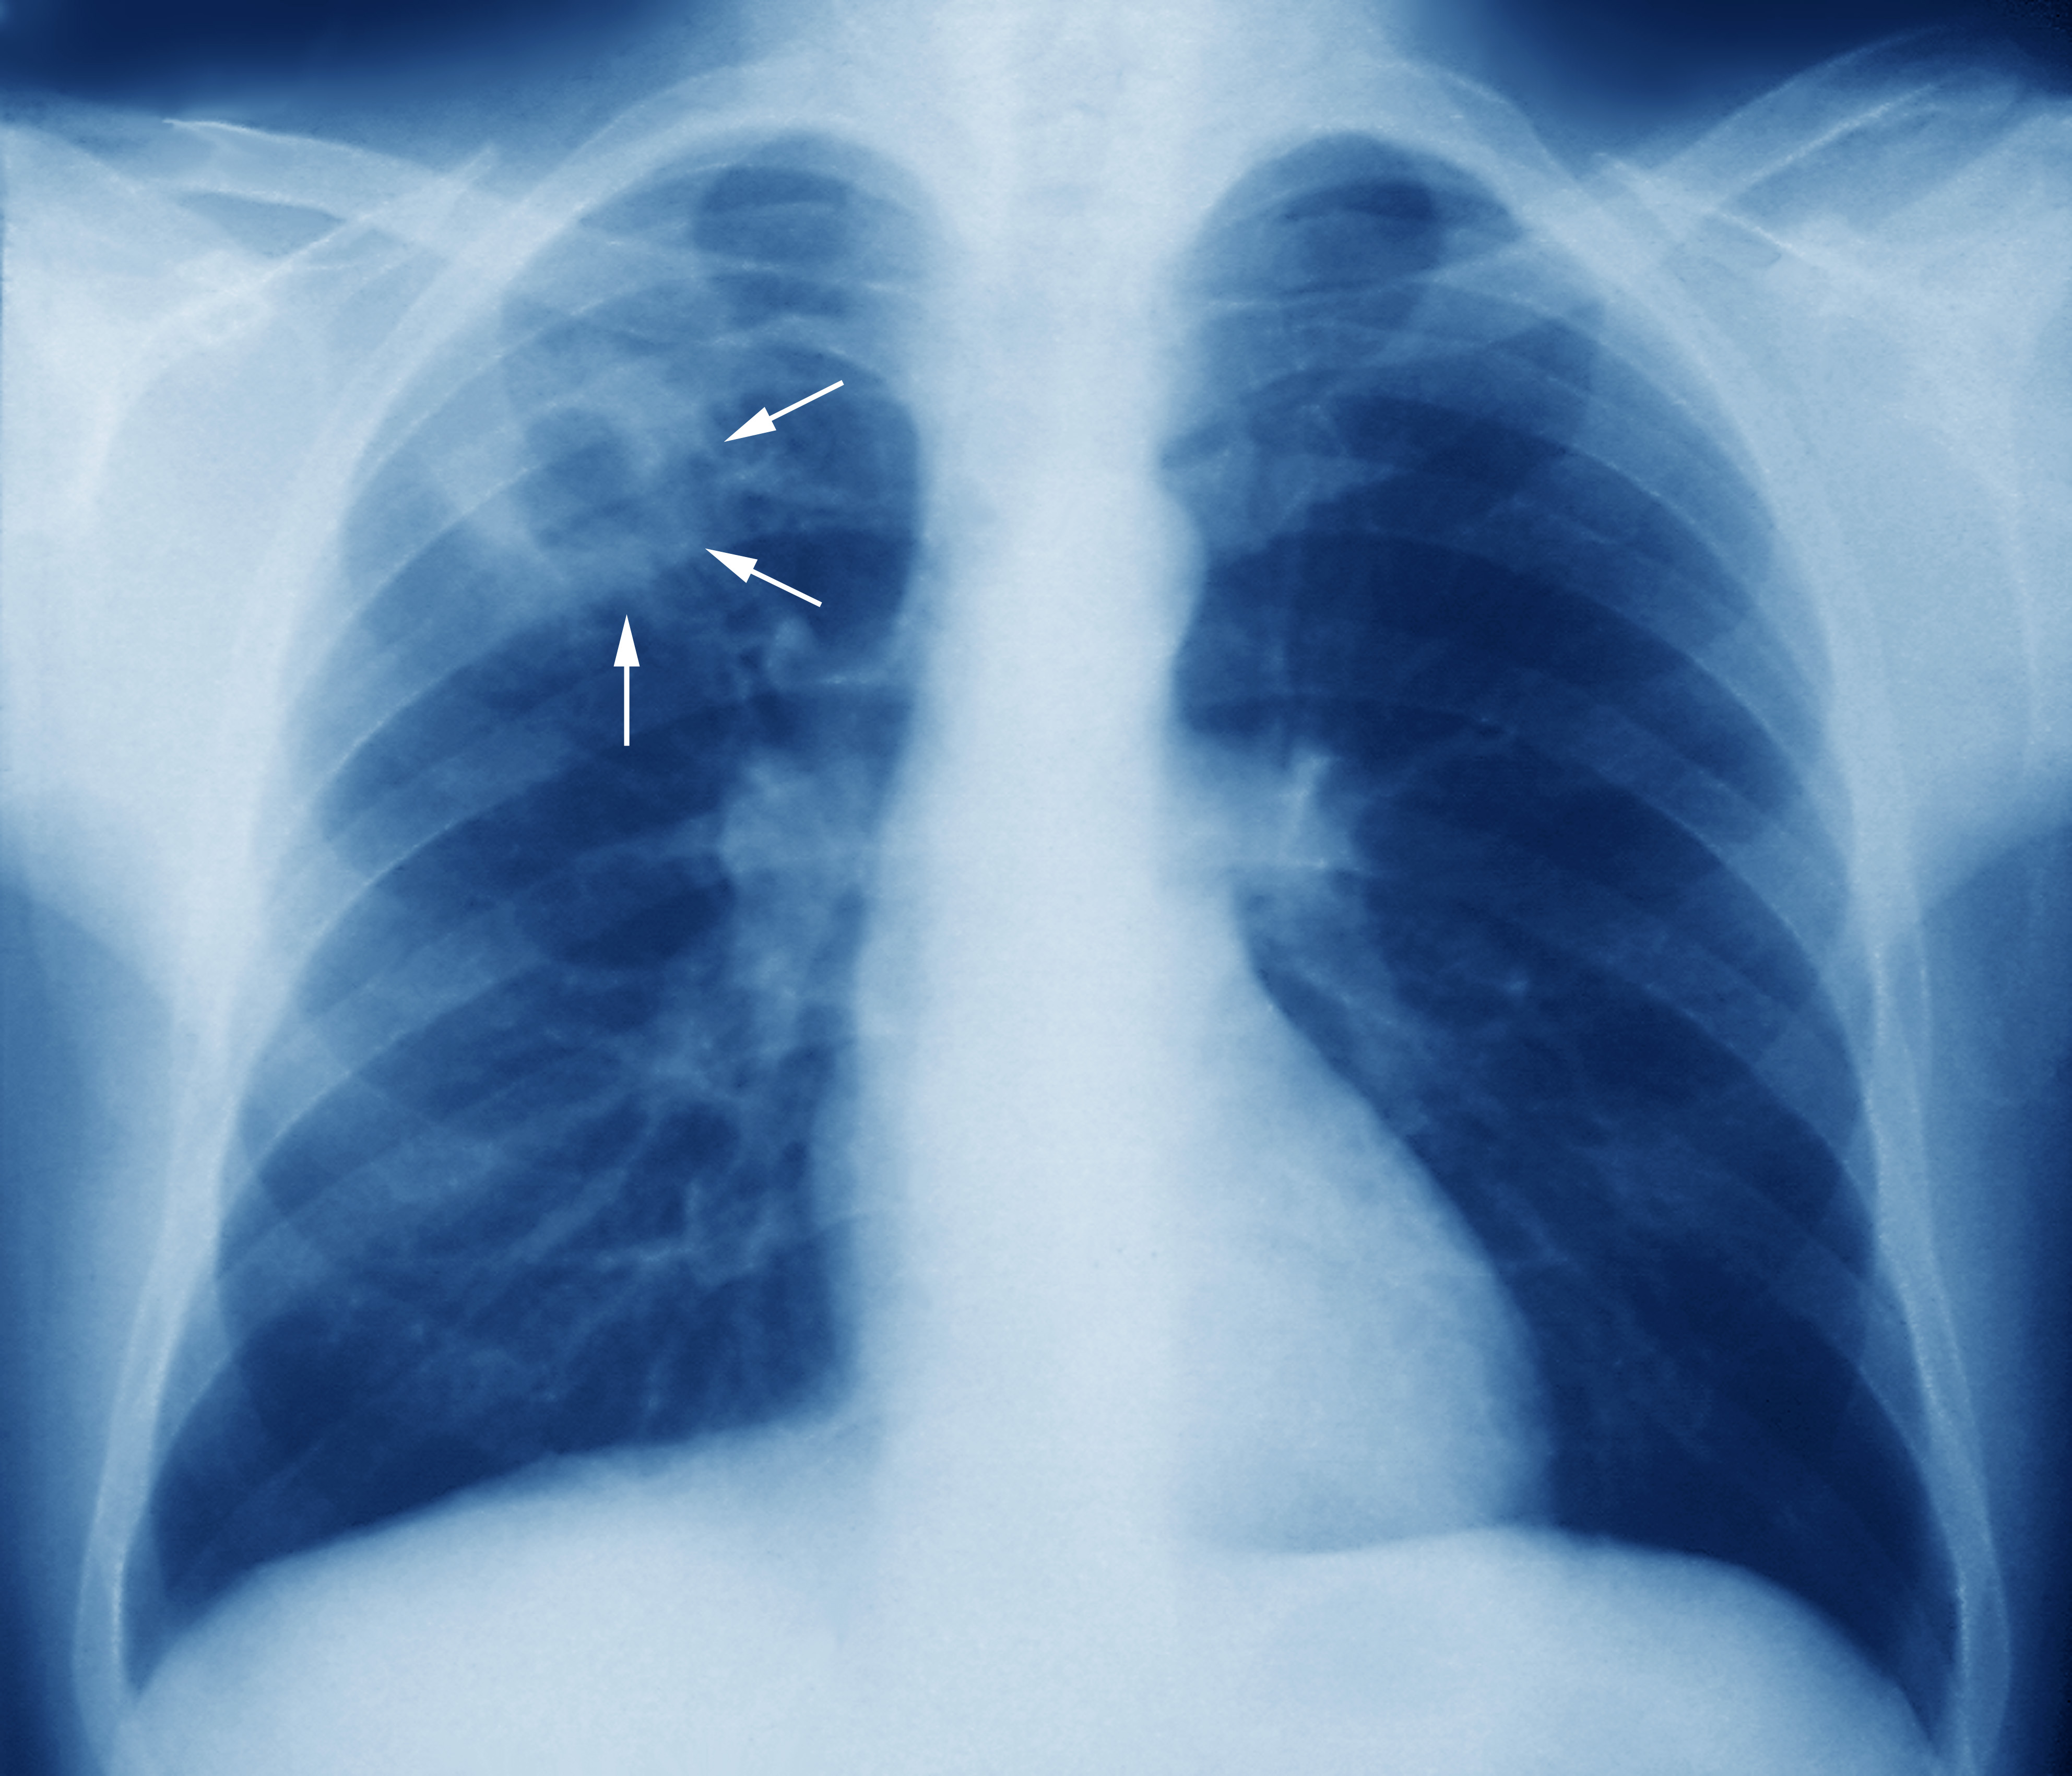 http://terveytta.net/wp-content/uploads/2020/12/m2700245-tuberculosis-chest-x-ray-science-photo-library-high.jpg